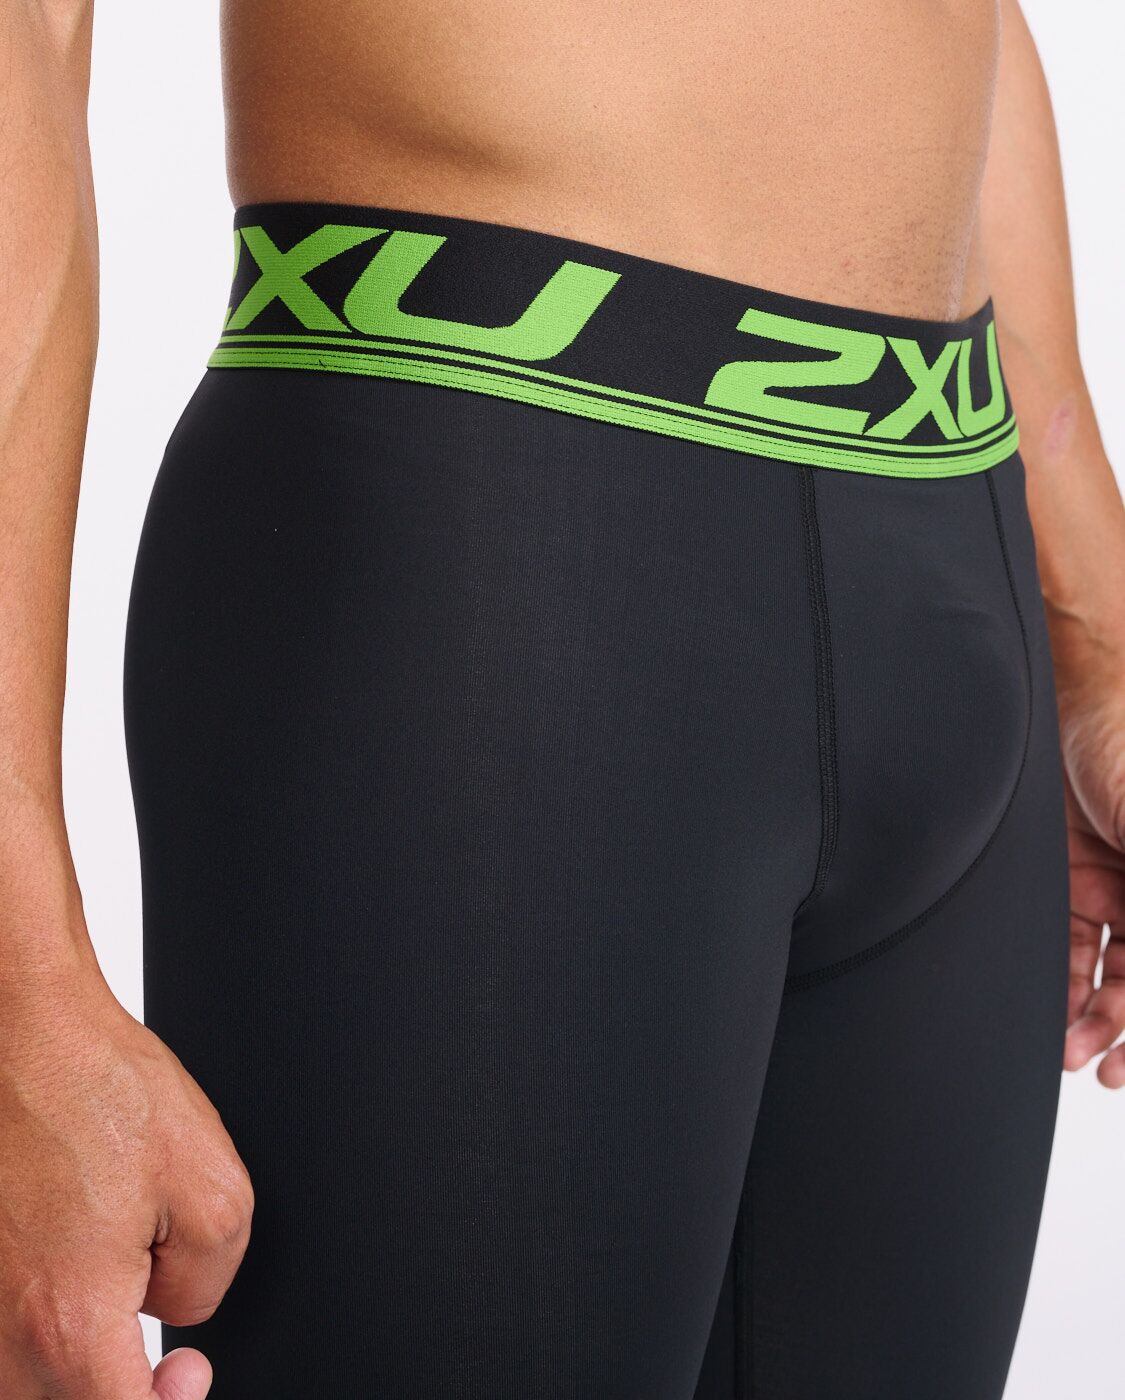 2XU Men's Elite Power Recovery Compression Tights, Black/Nero, X-Large/Tall